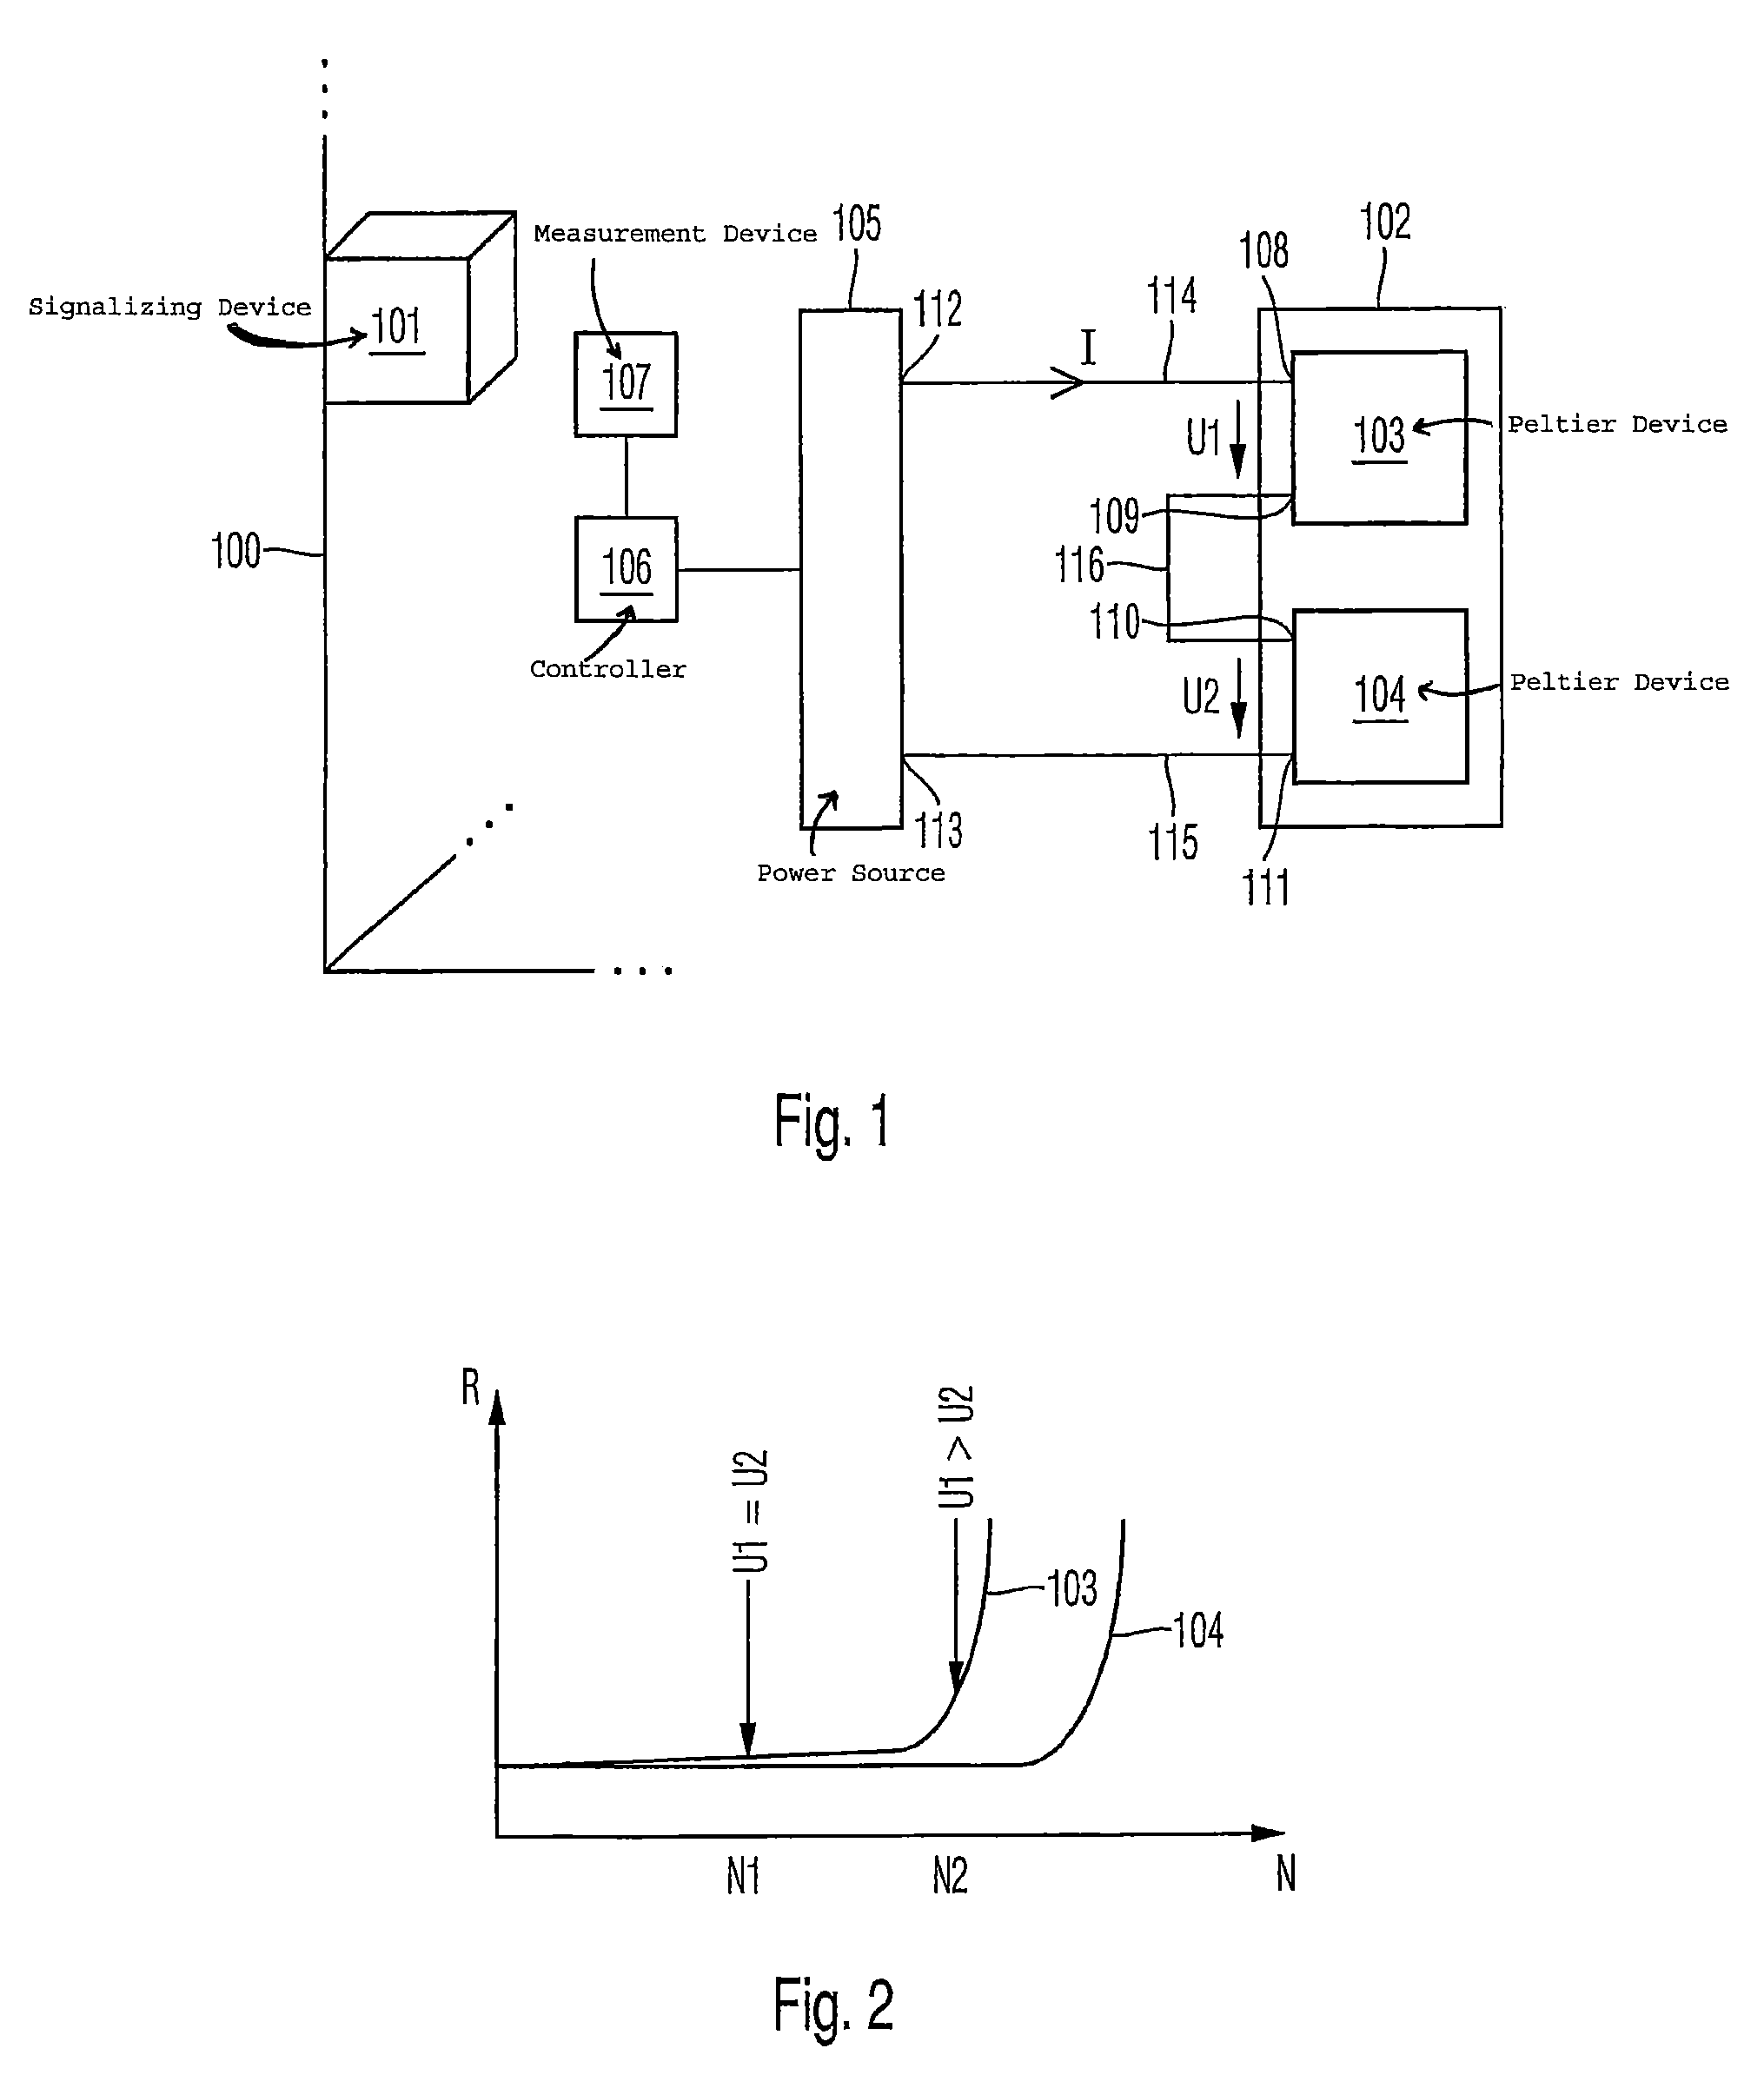 System and methods for monitoring a thermoelectric heating and cooling device